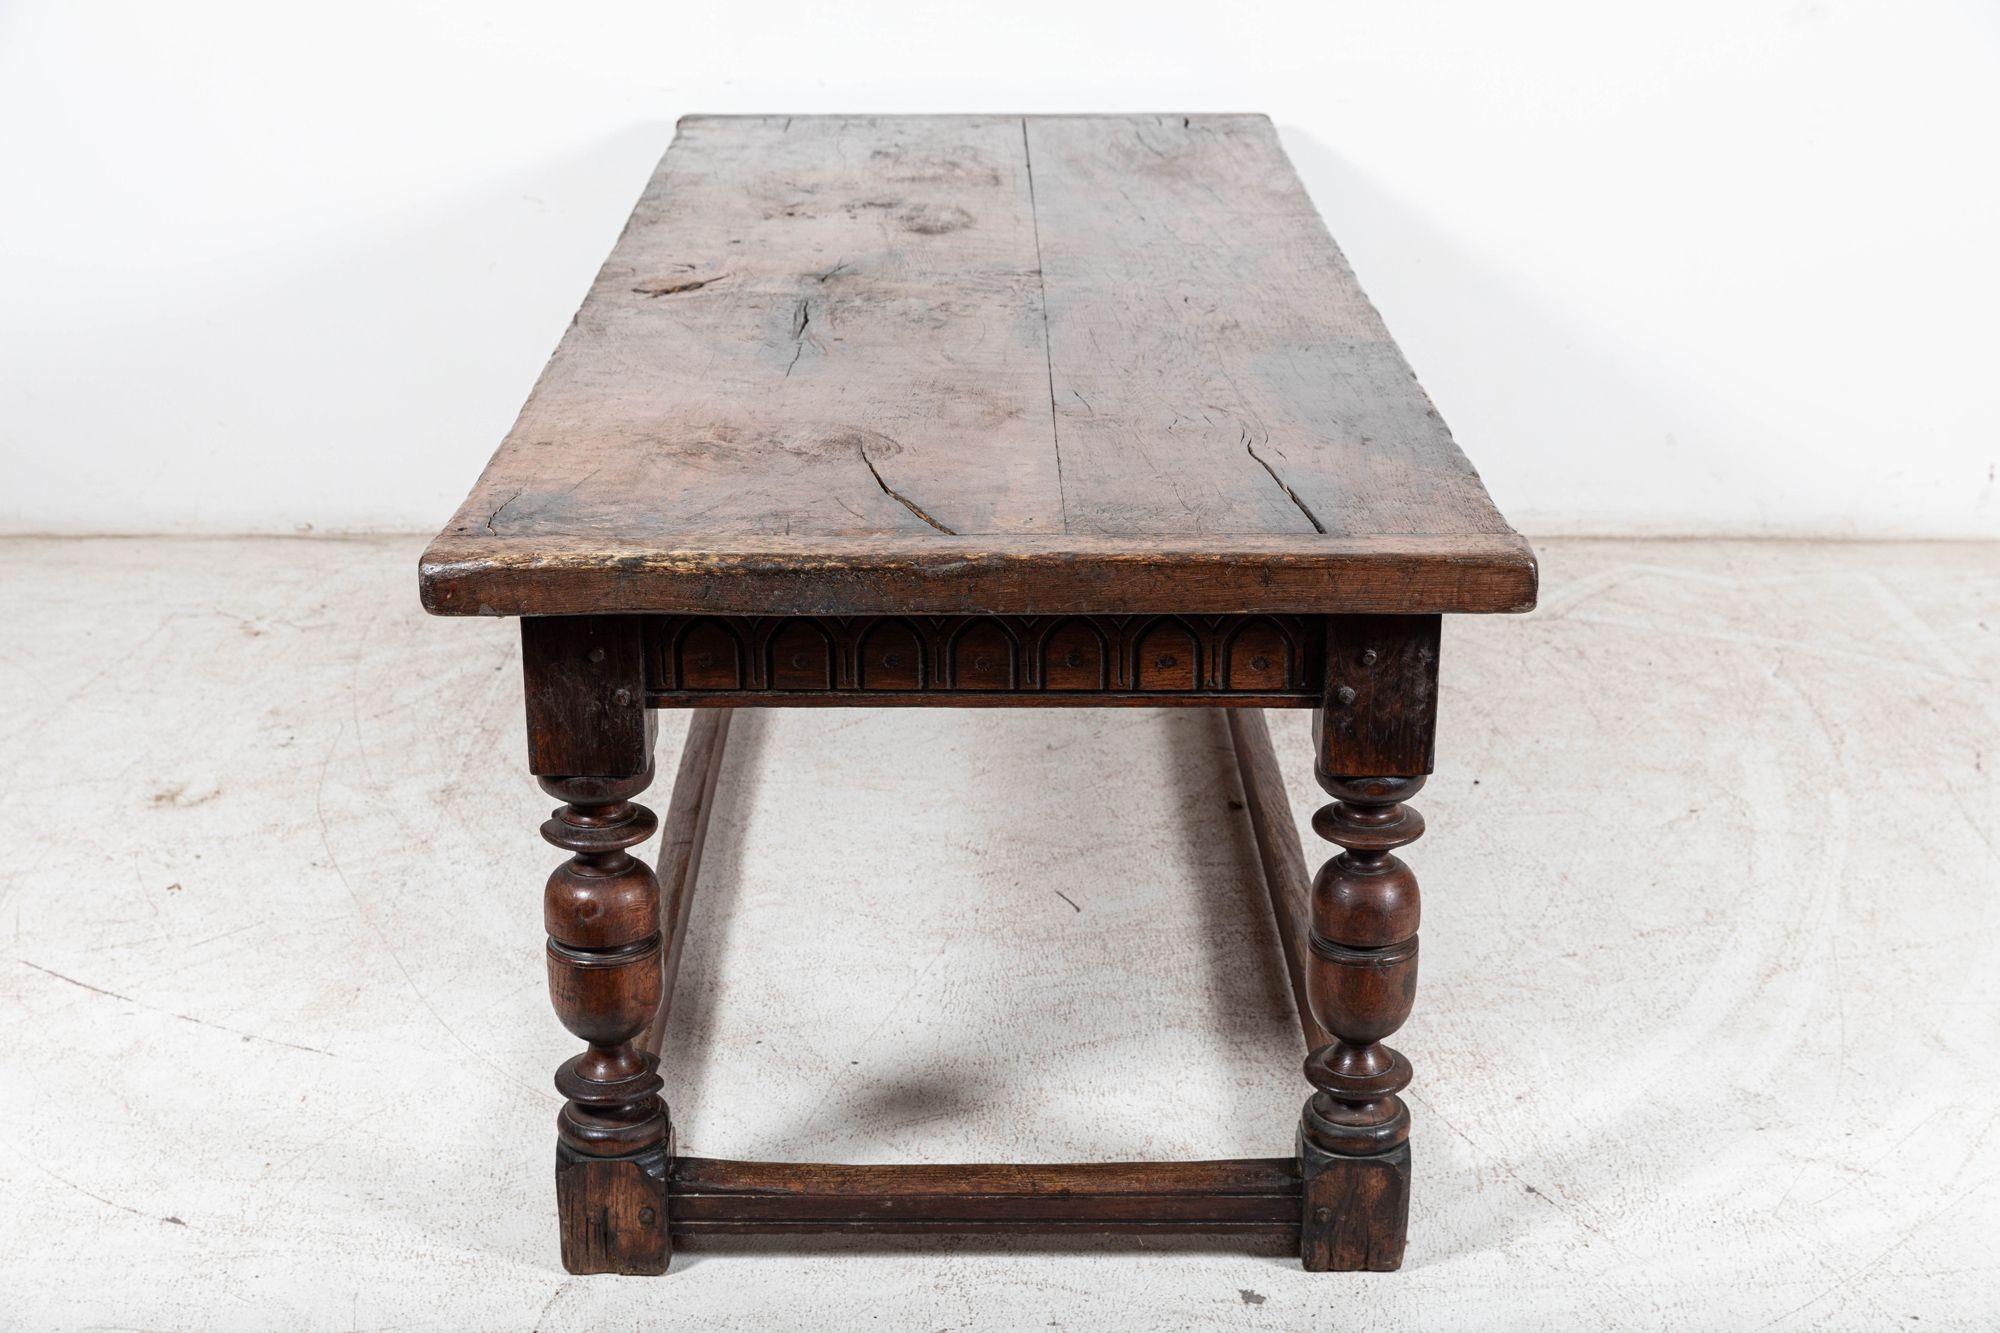 Circa 1690

Large English 17thC Elm & Oak Refectory Table with 2 Plank Elm and cleated top of lovely colour and rich patination over carved frieze rails.

Supported on substantial well turned baluster oak legs with stretchers. Removable 5cm thick